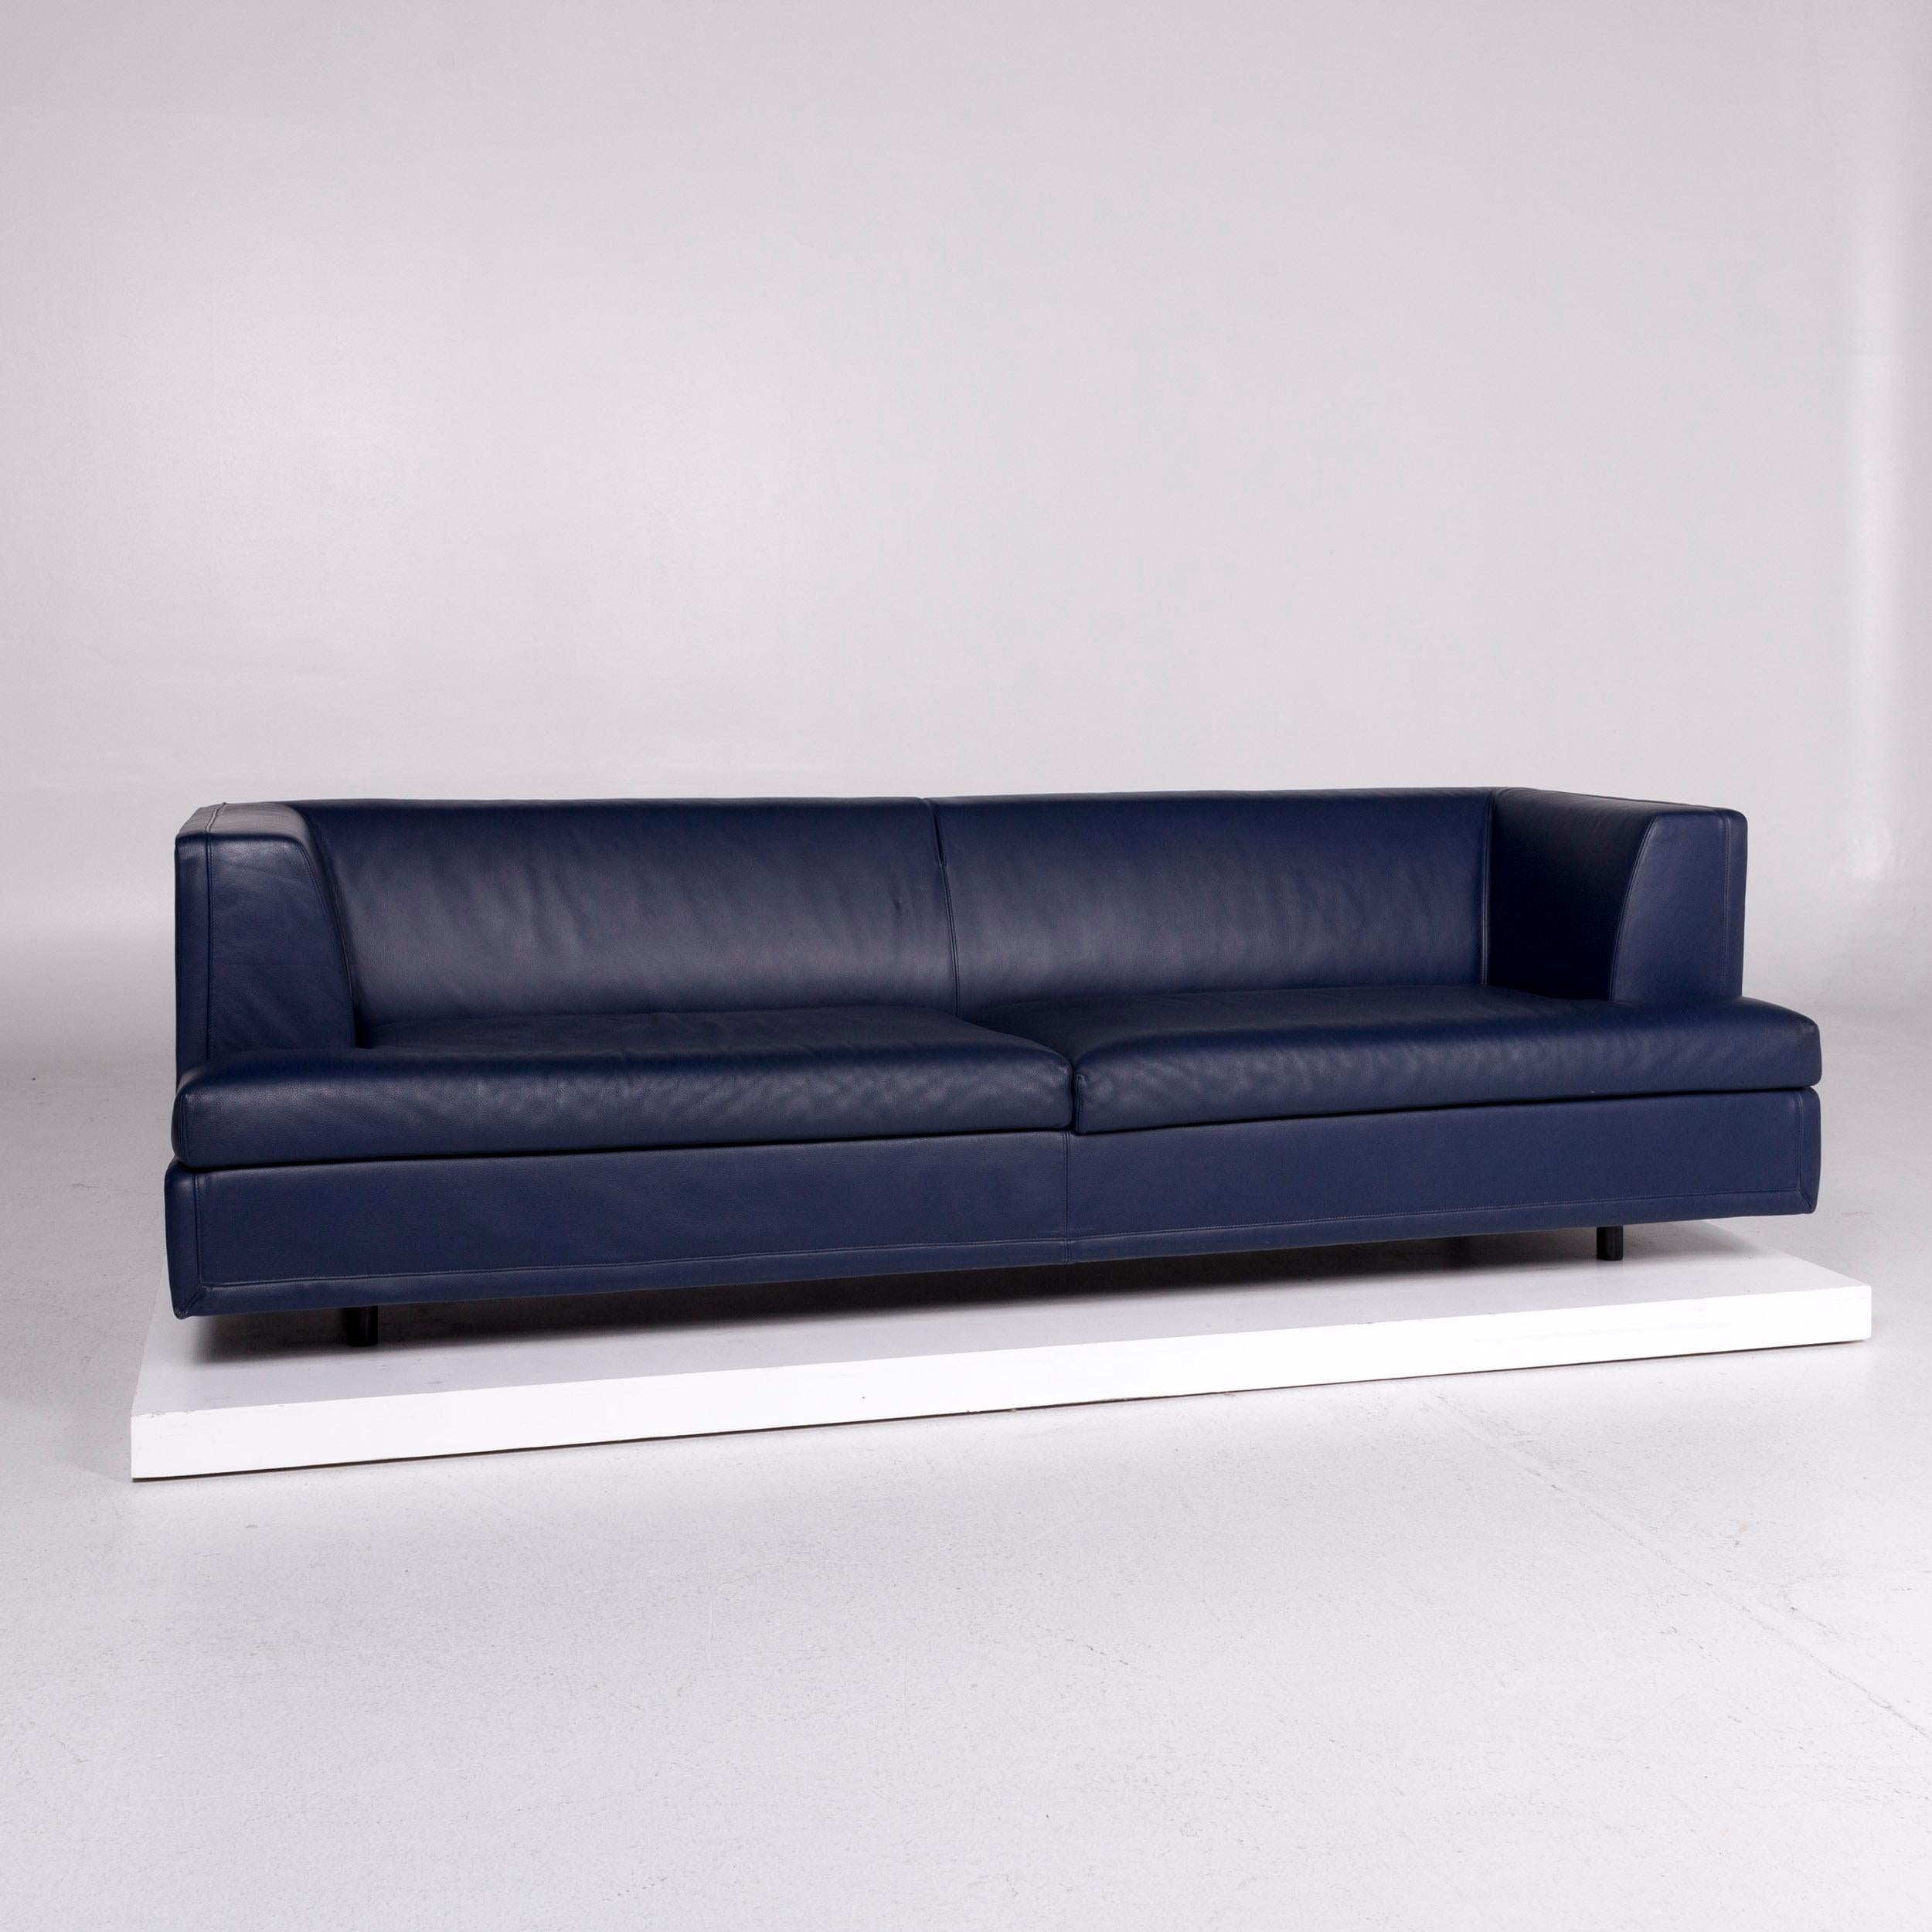 We bring to you a Wittmann La Scala leather sofa set Blue 1x three-seat 1x two-seat 1x.
 
 Product measurements in centimeters:
 
Depth 91
Width 241
Height 71
Seat-height 42
Rest-height 71
Seat-depth 61
Seat-width 194
Back-height 31.
  